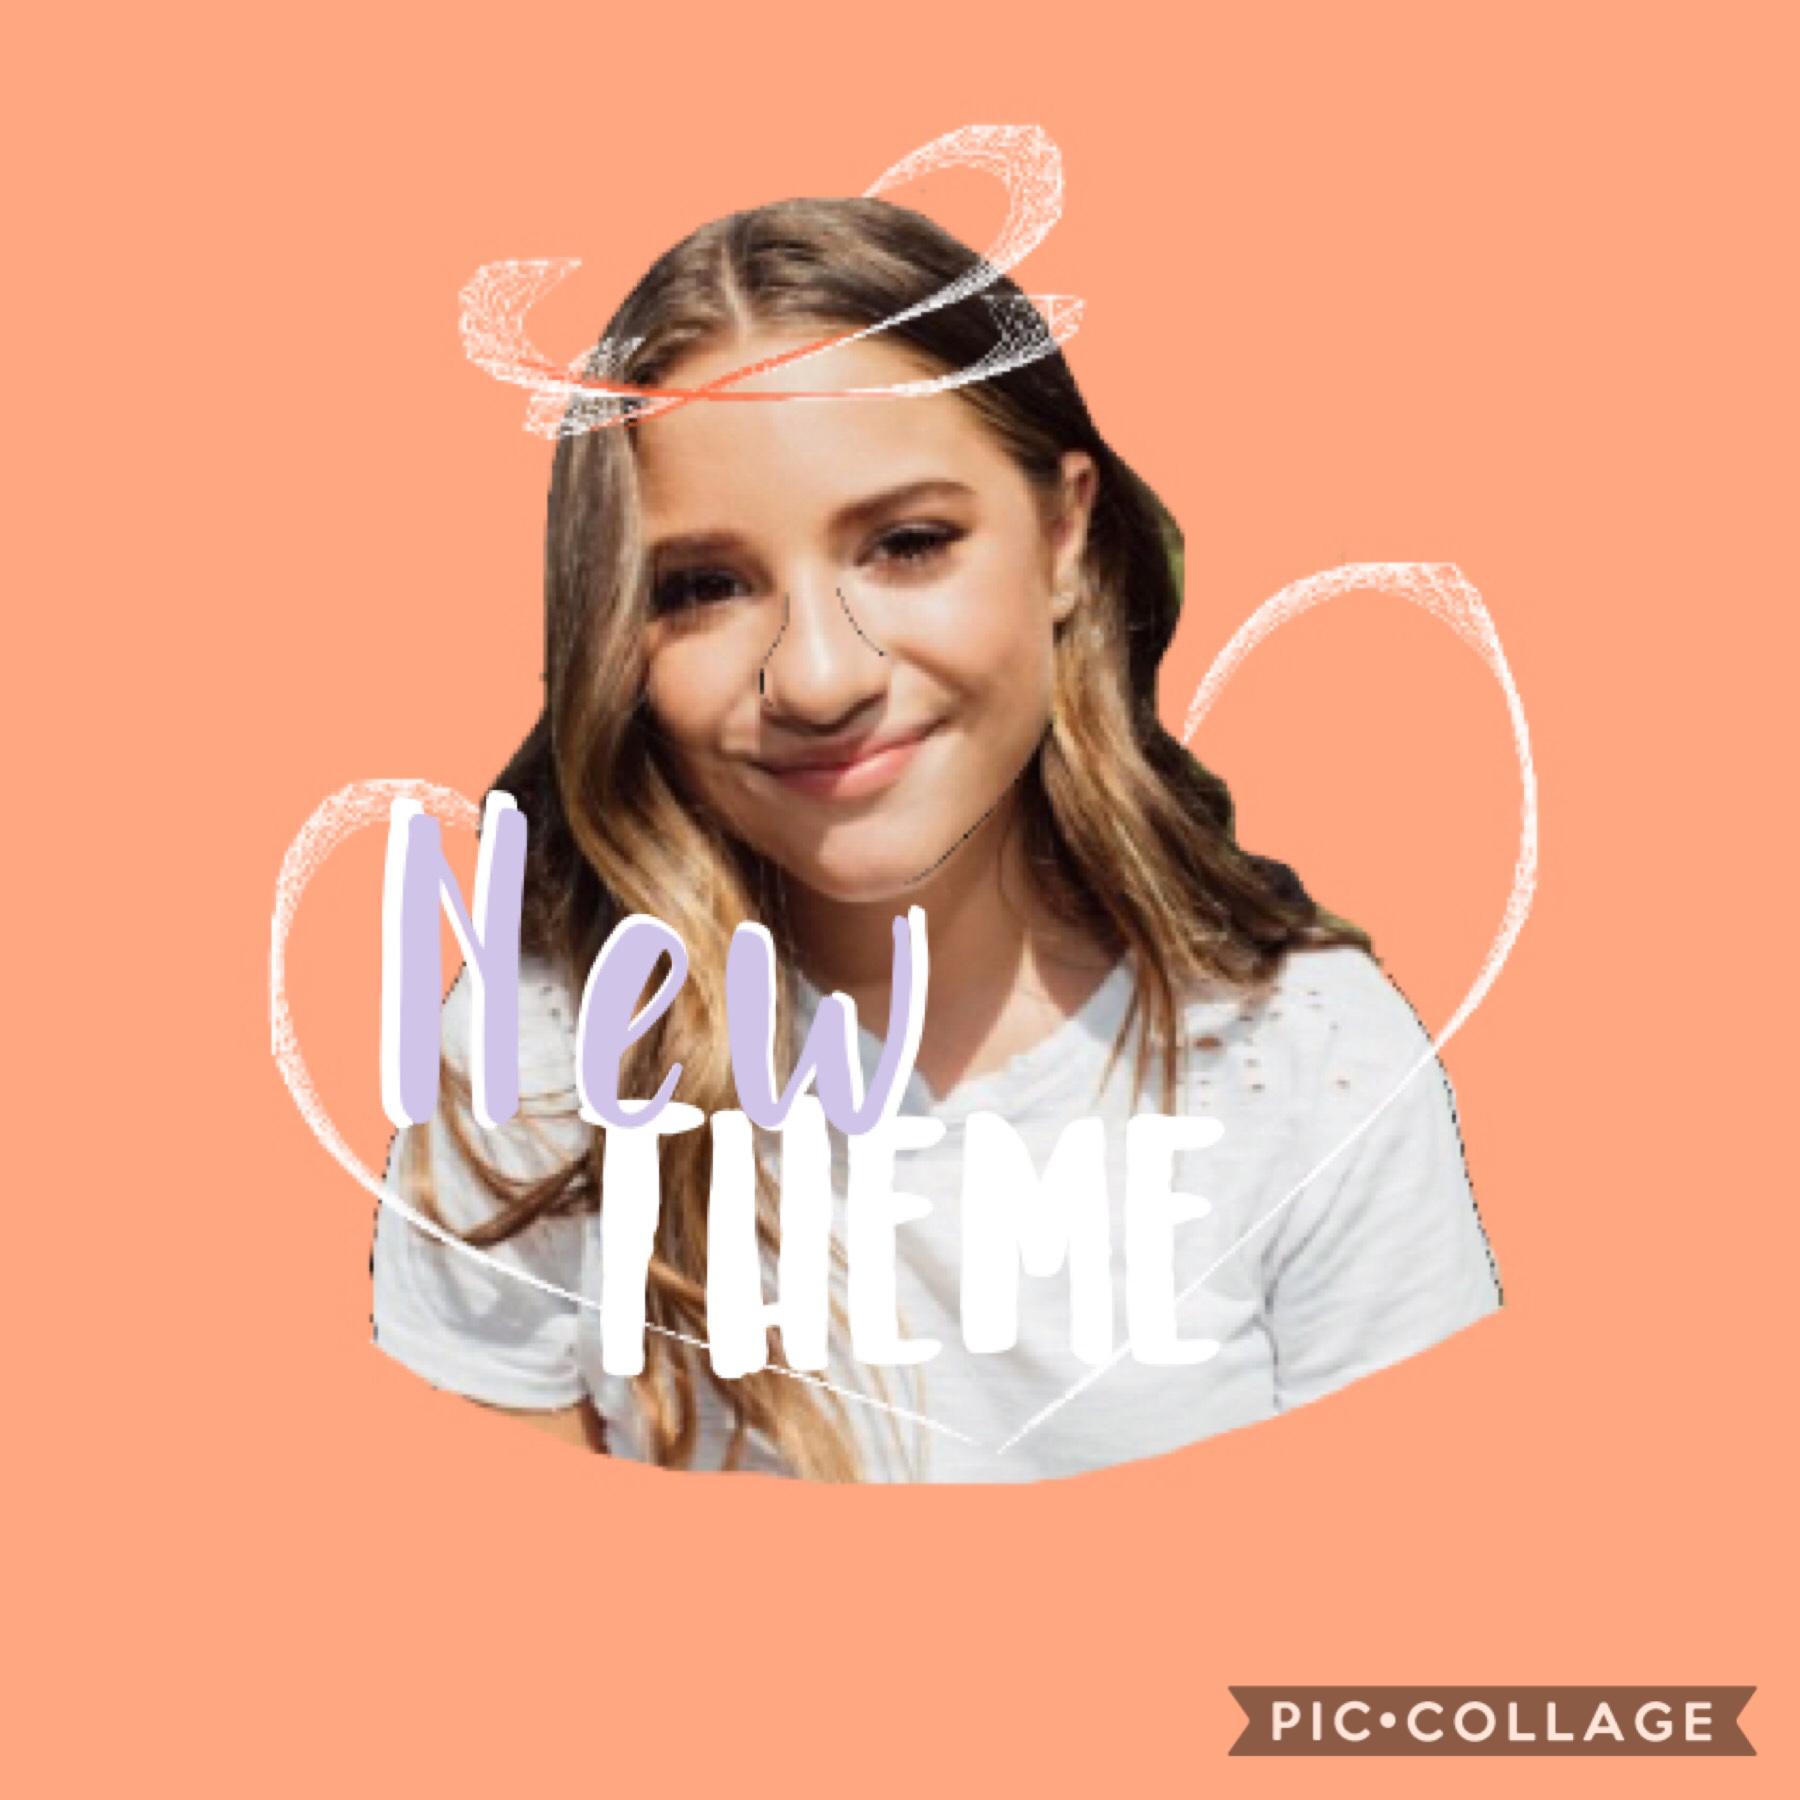 🧡Tap🧡

New theme:
Mackenzie Ziegler!!!!
My icon request is still open if you would like a free icon!!!